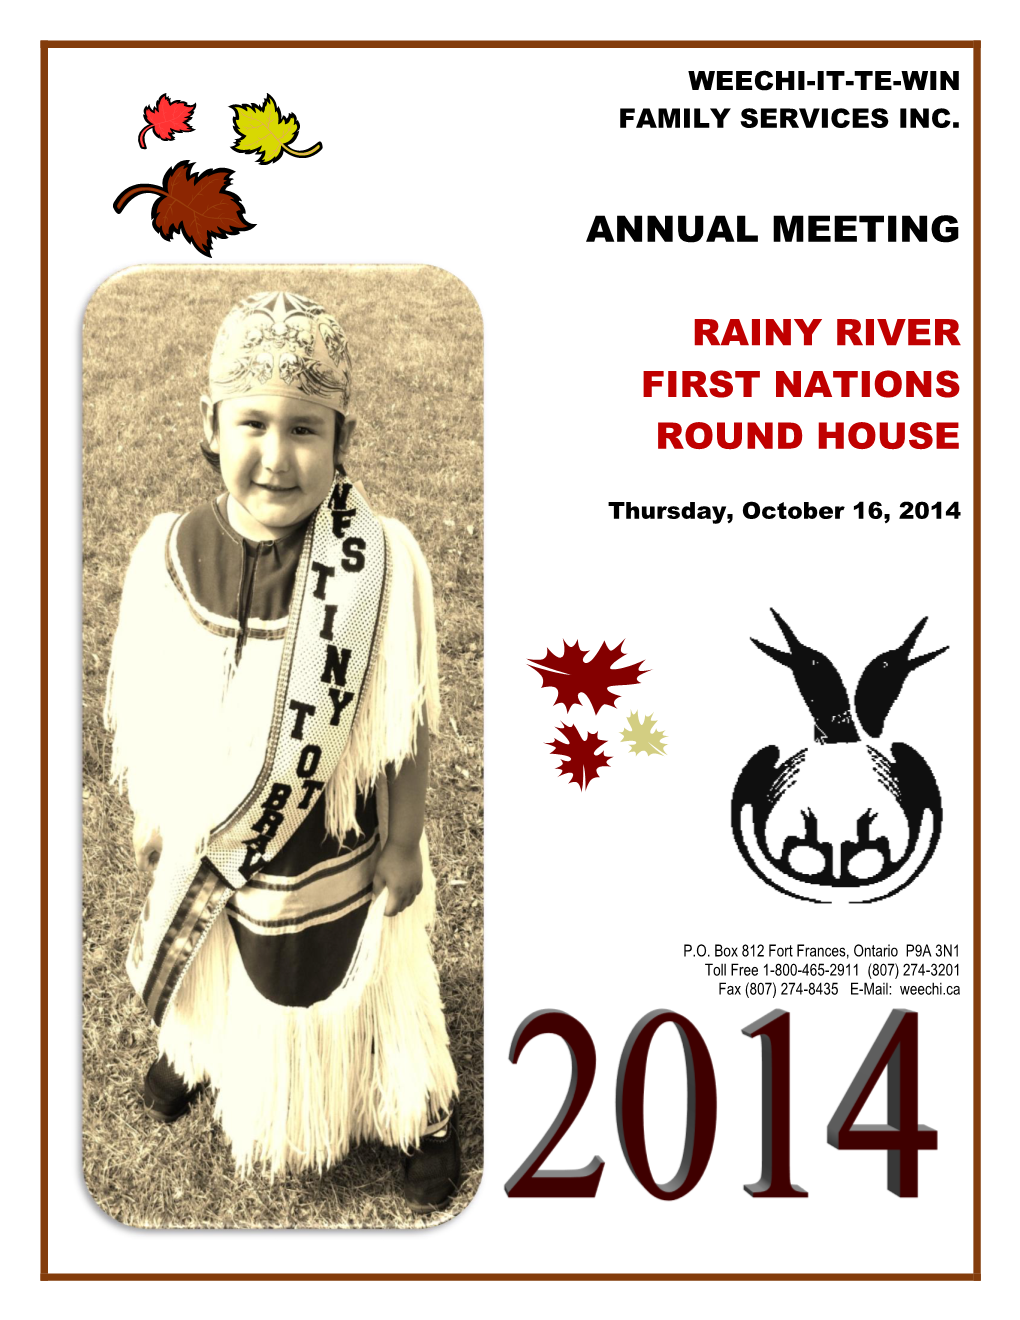 Annual Meeting Rainy River First Nations Round House